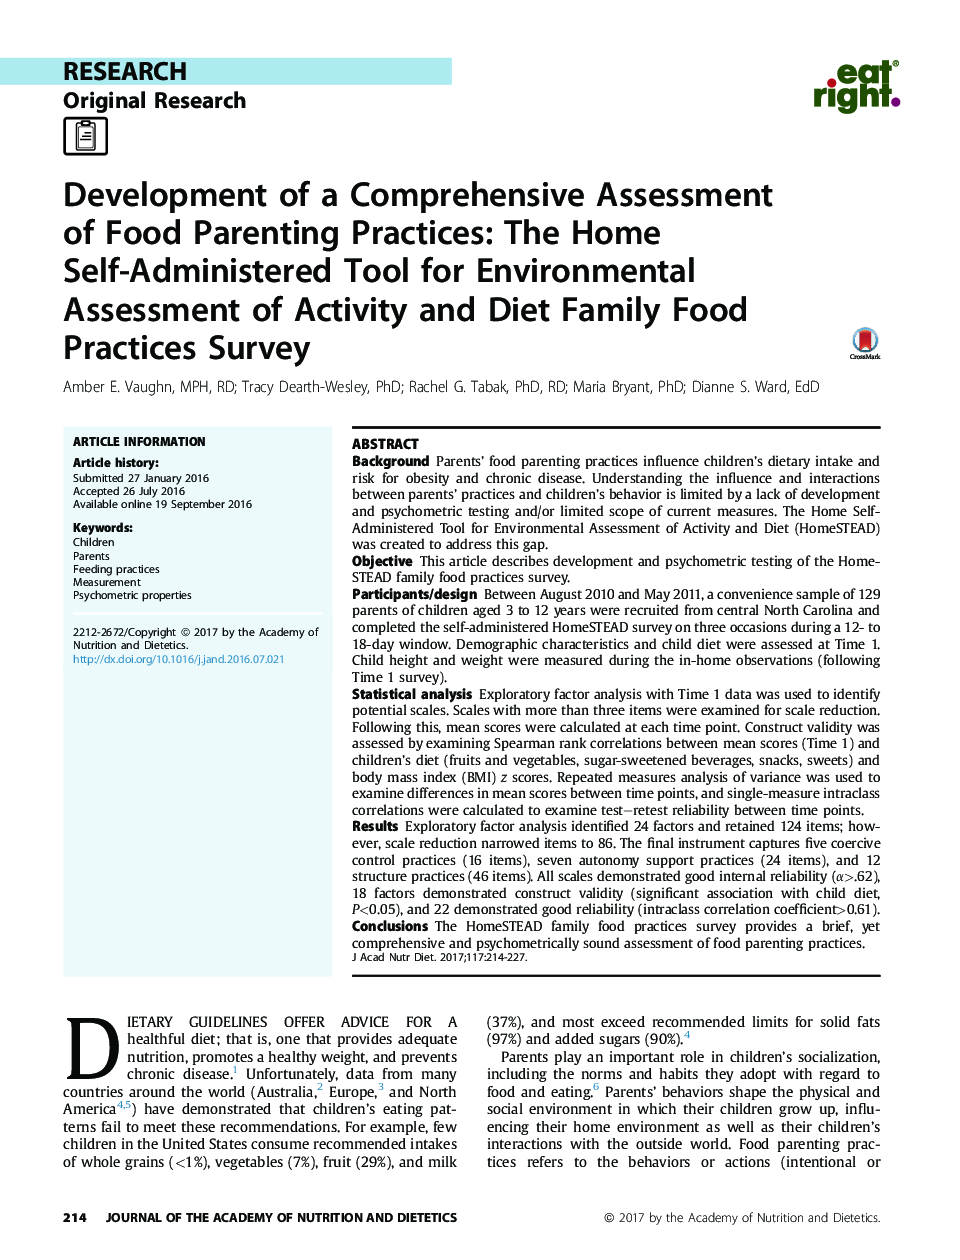 Development of a Comprehensive Assessment of Food Parenting Practices: The Home Self-Administered Tool for Environmental Assessment of Activity and Diet Family Food Practices Survey